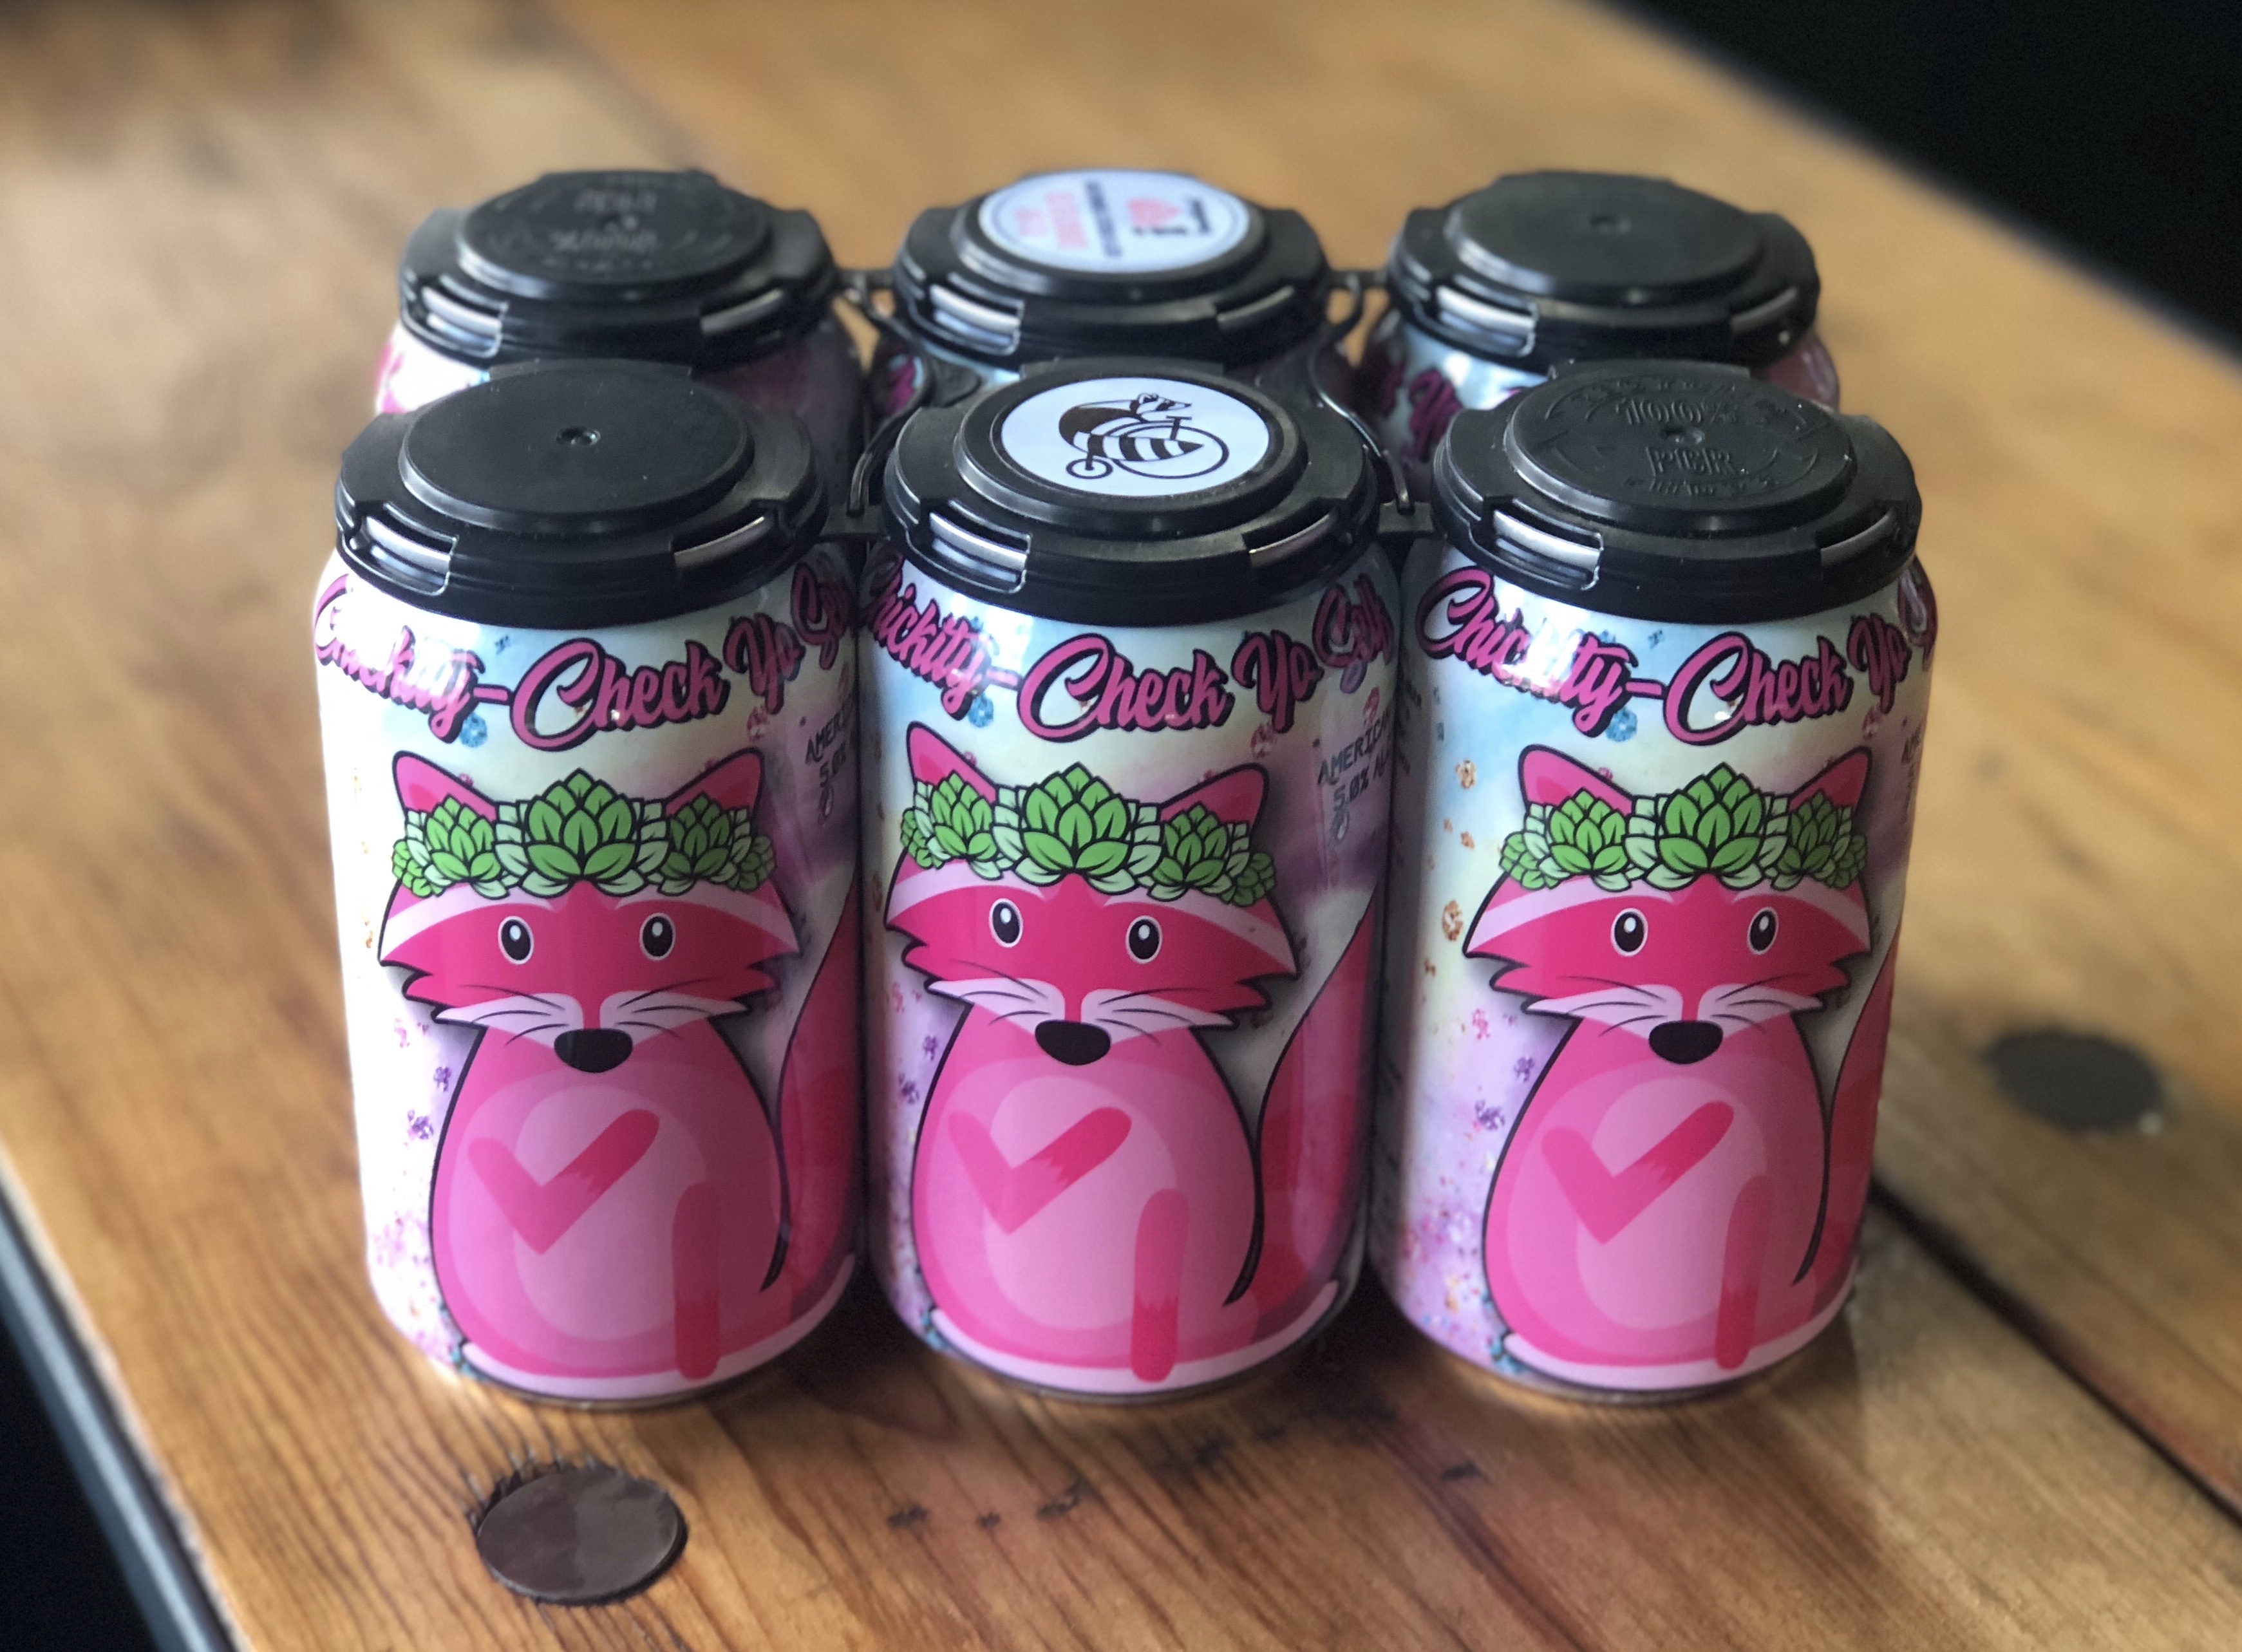 Beer for Breast Cancer: Chickity-Check Yo Self Pale Ale